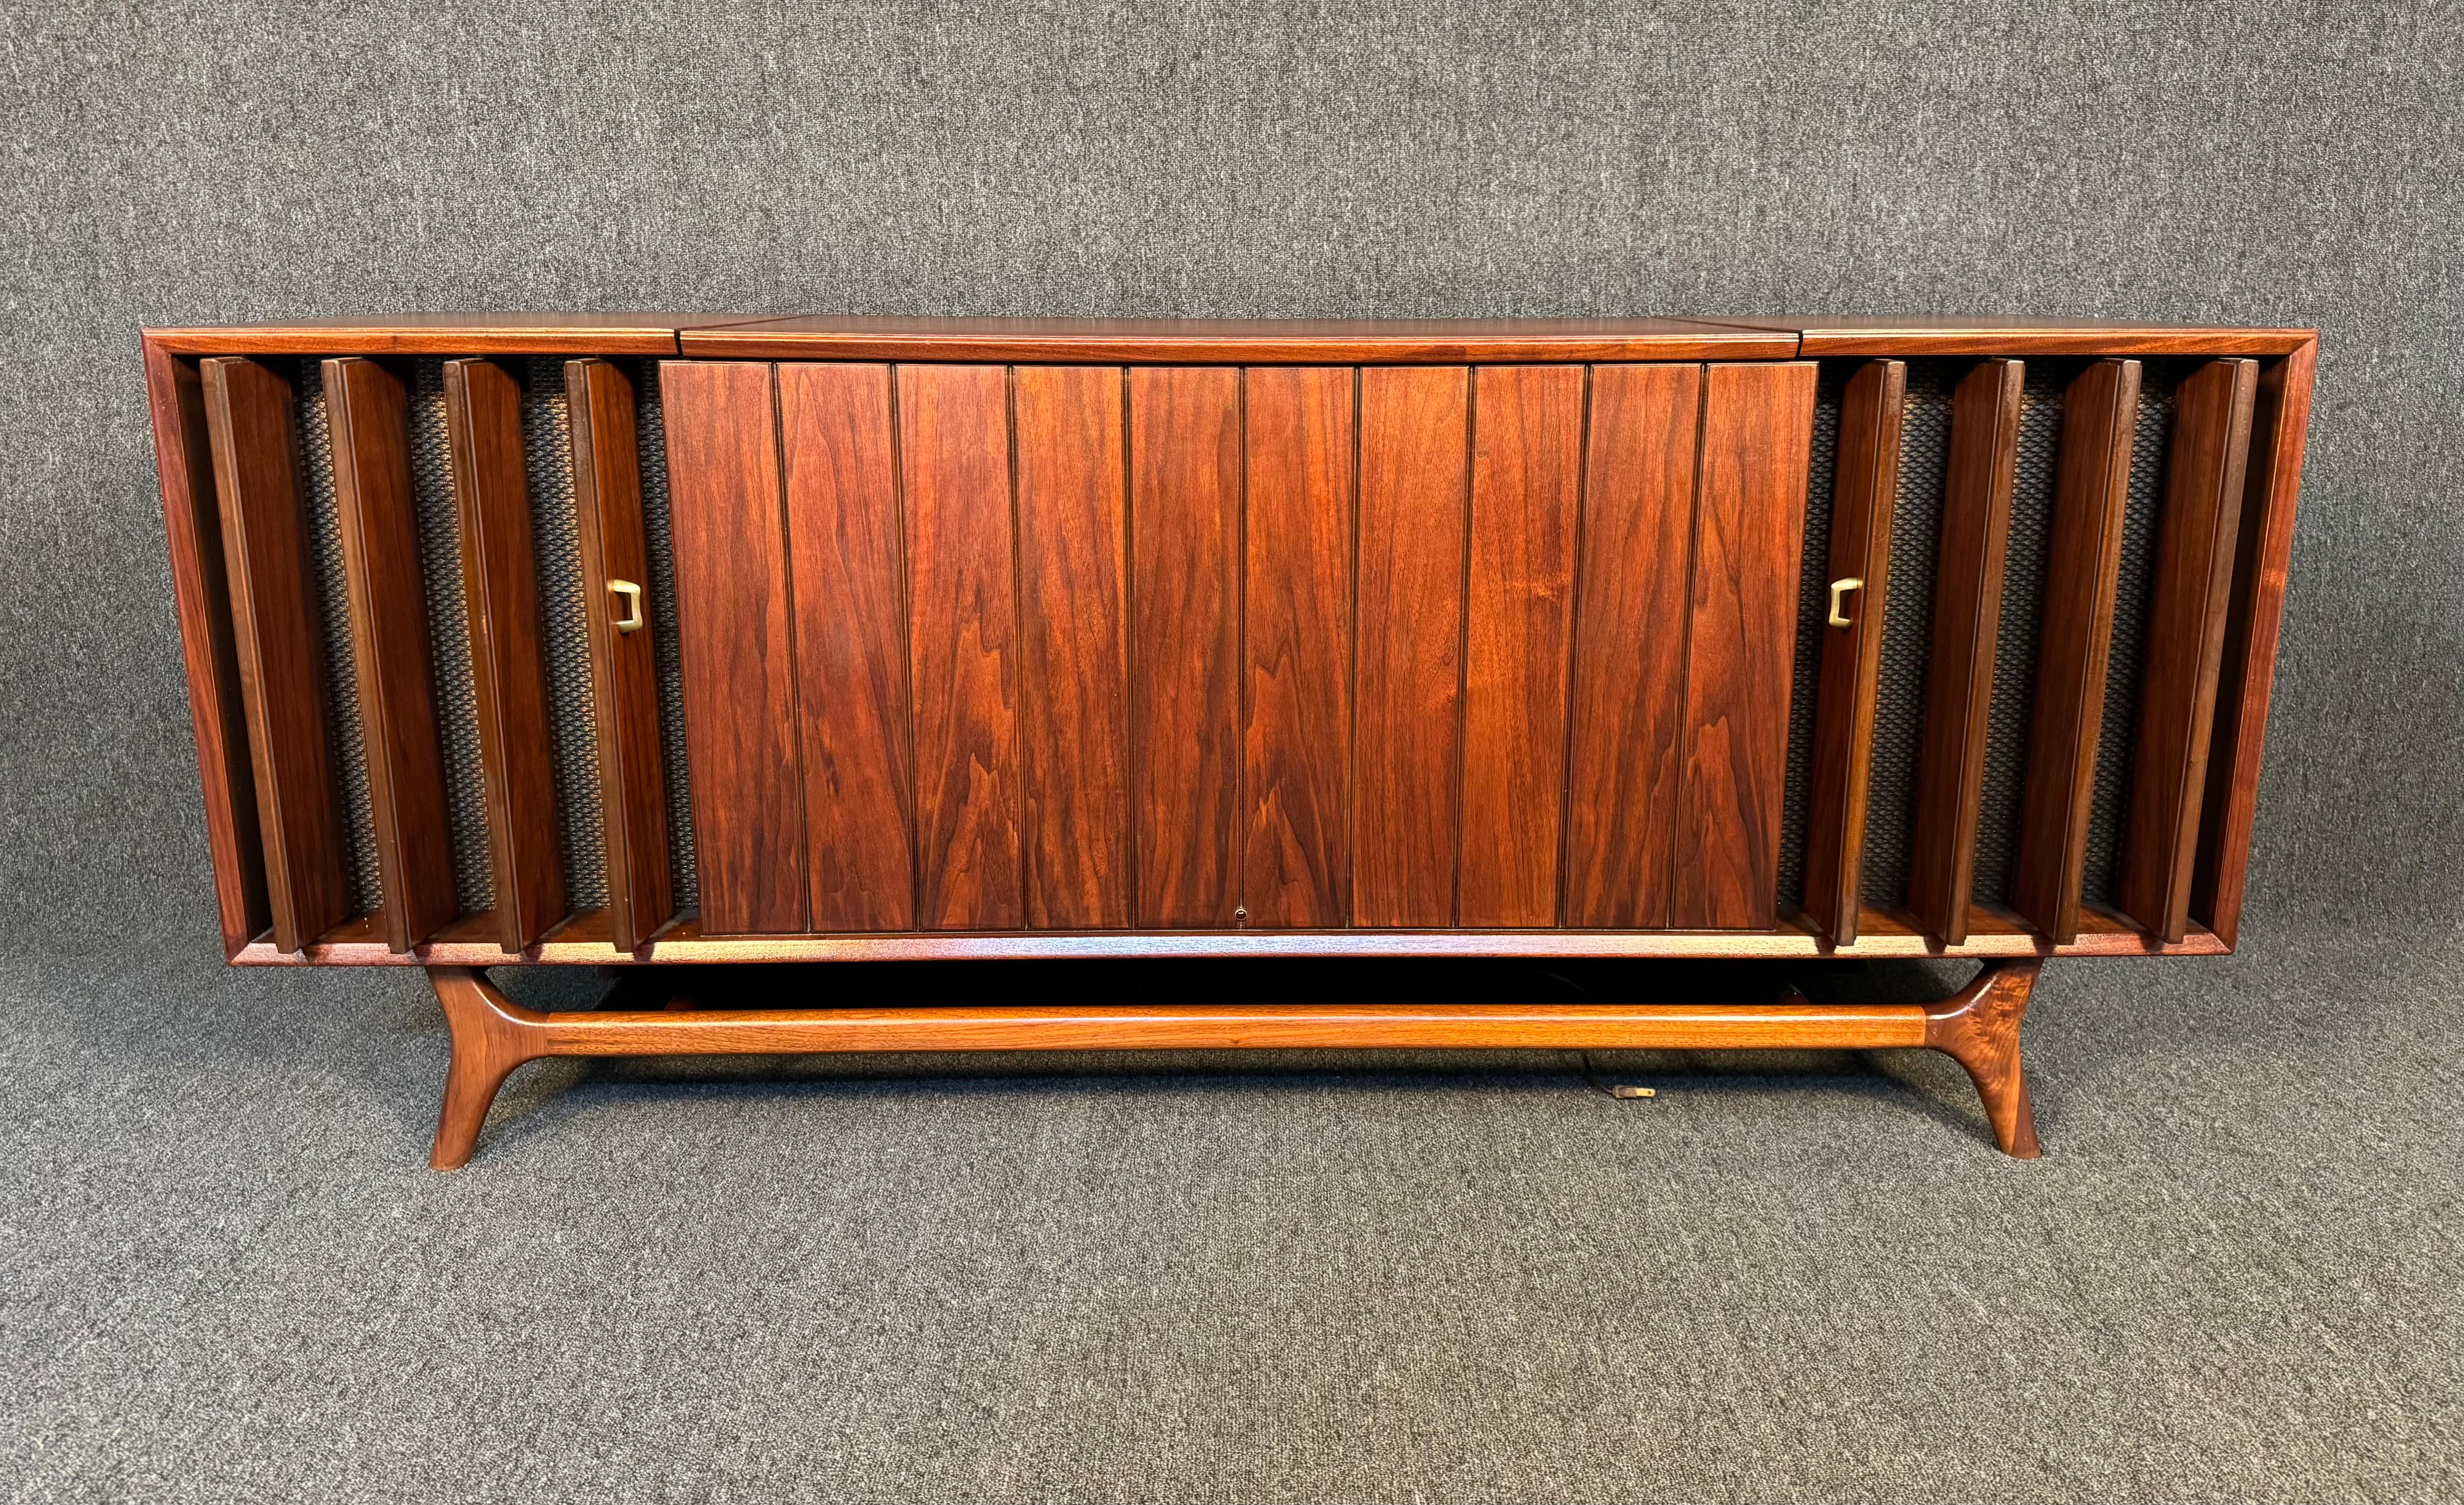 American Vintage Mid Century Modern Walnut Zenith Stereo Console For Sale